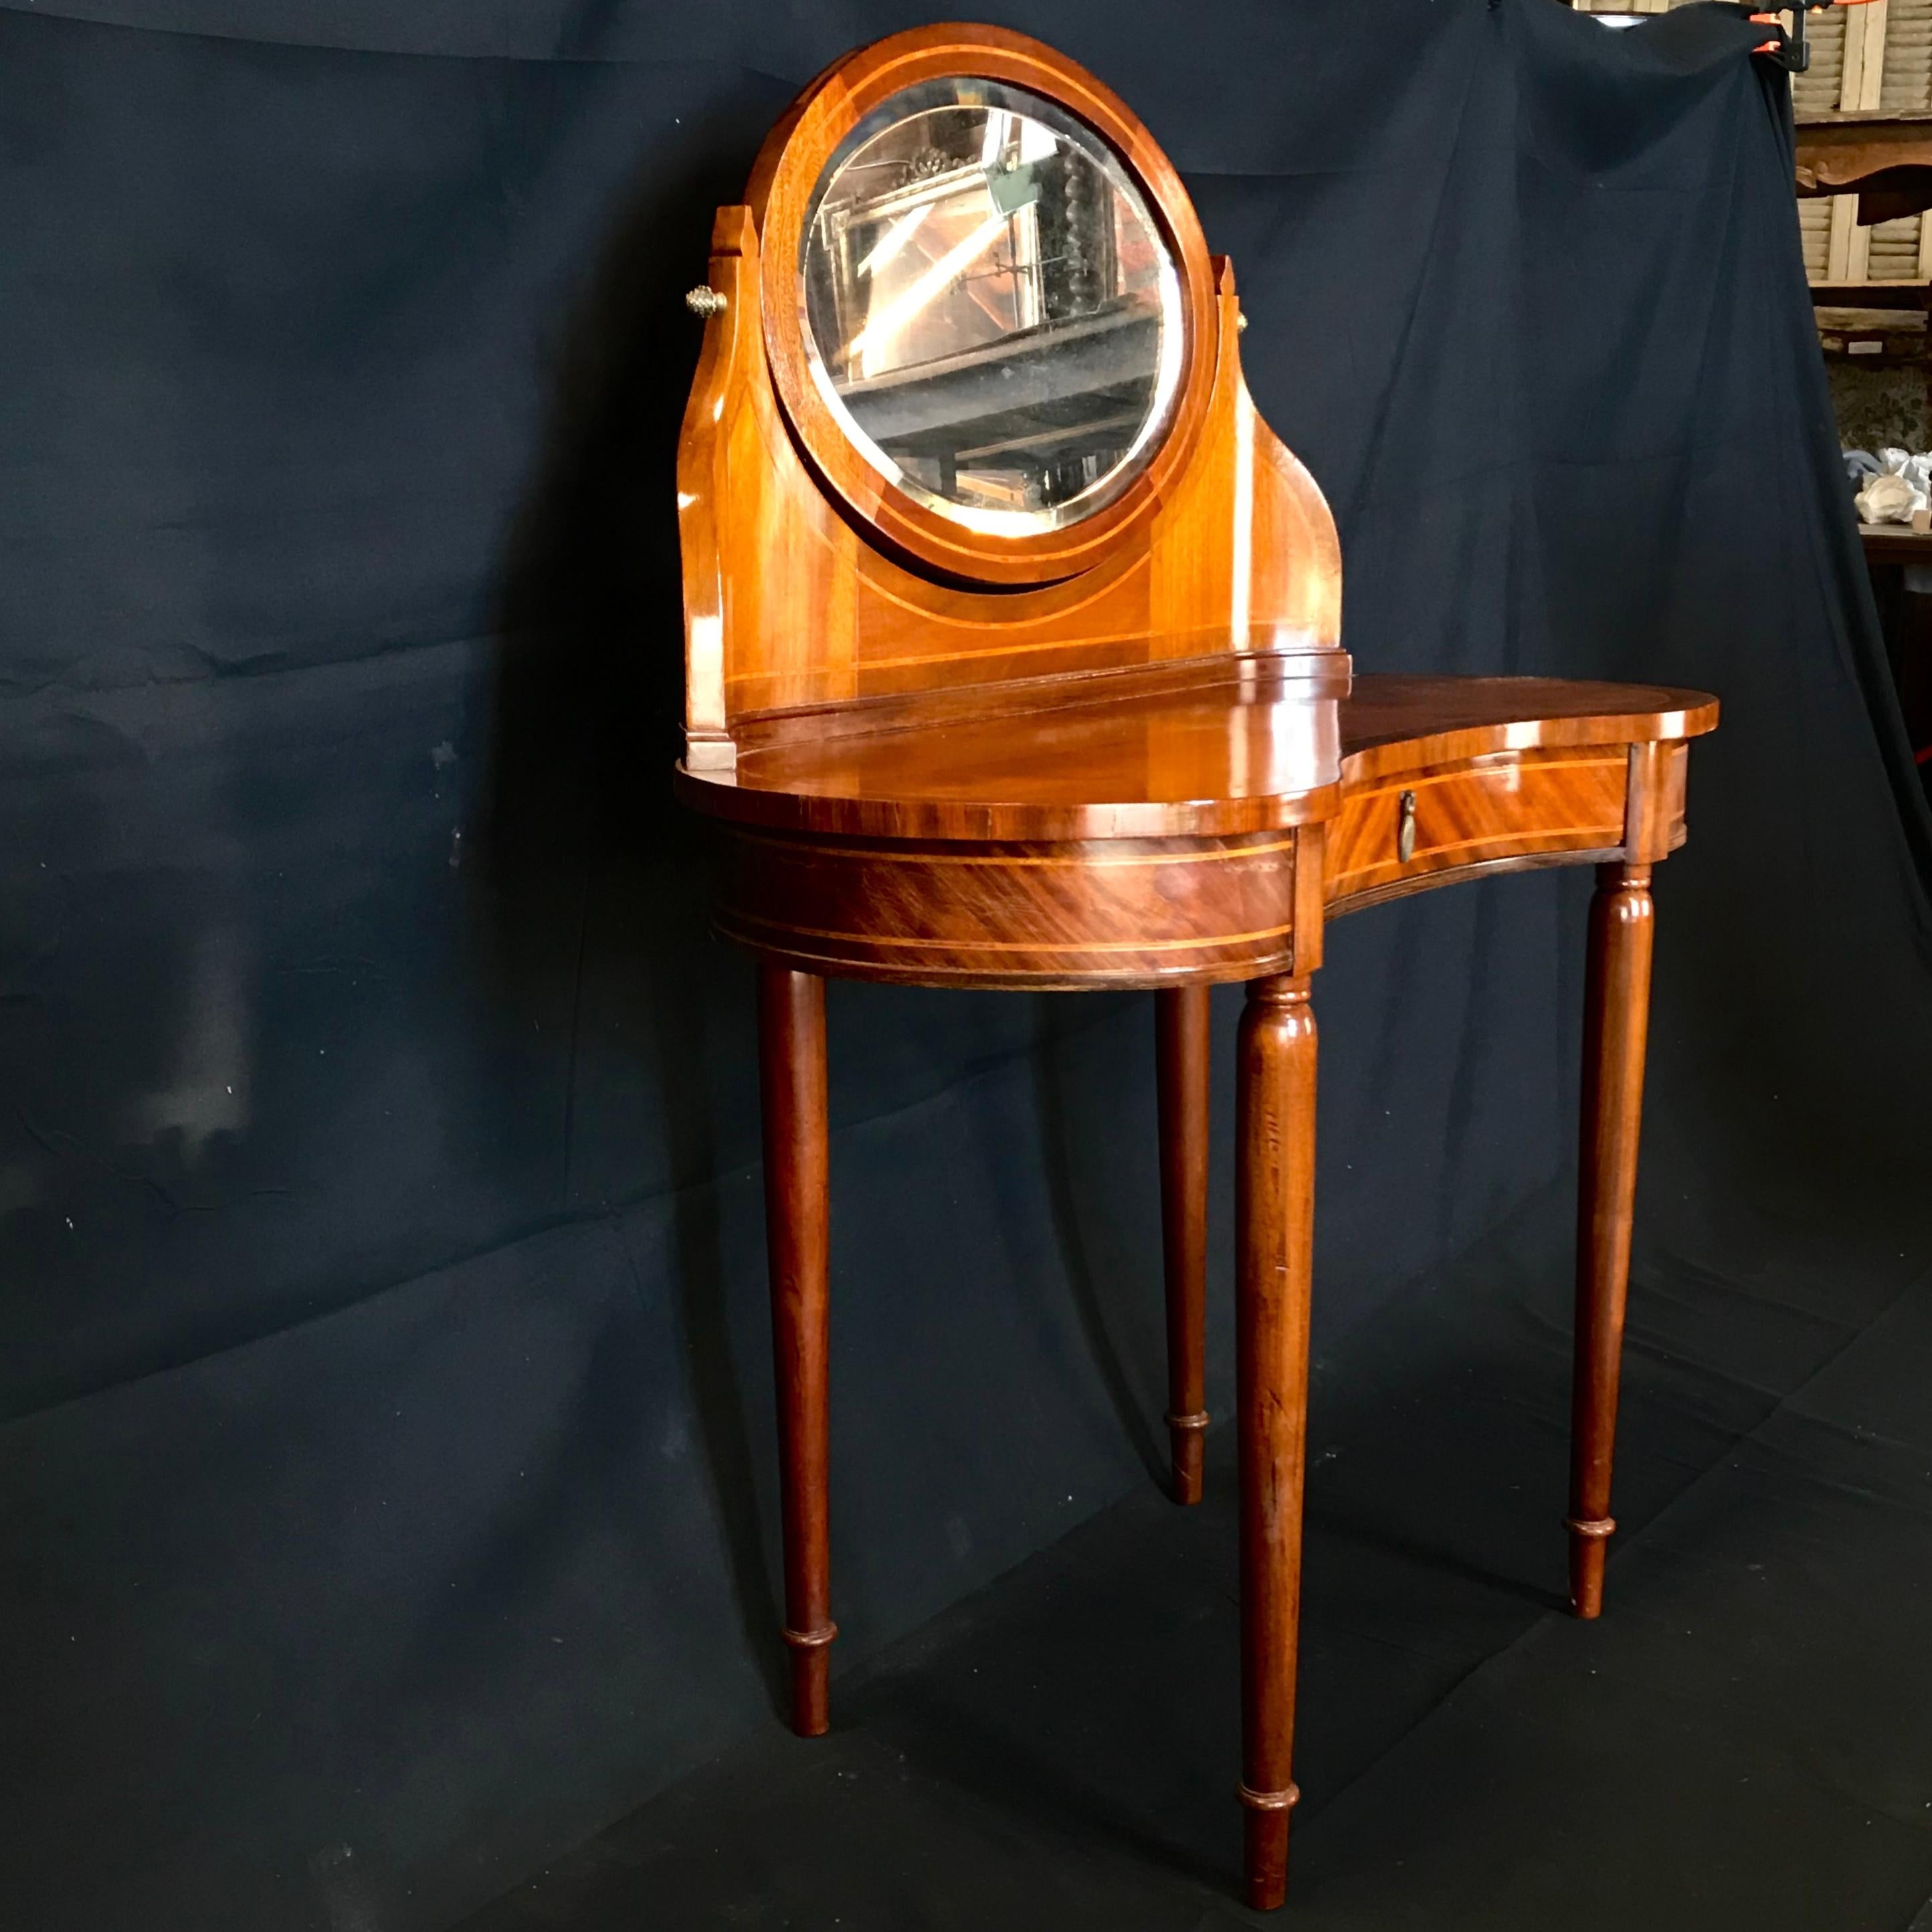 A French walnut inlaid dressing table, circa 1930. This fine dressing table has a kidney shaped top with gilt-bronze mirror support and a superstructure supporting an oval beveled mirror, above one center frieze drawer and raised on delicate